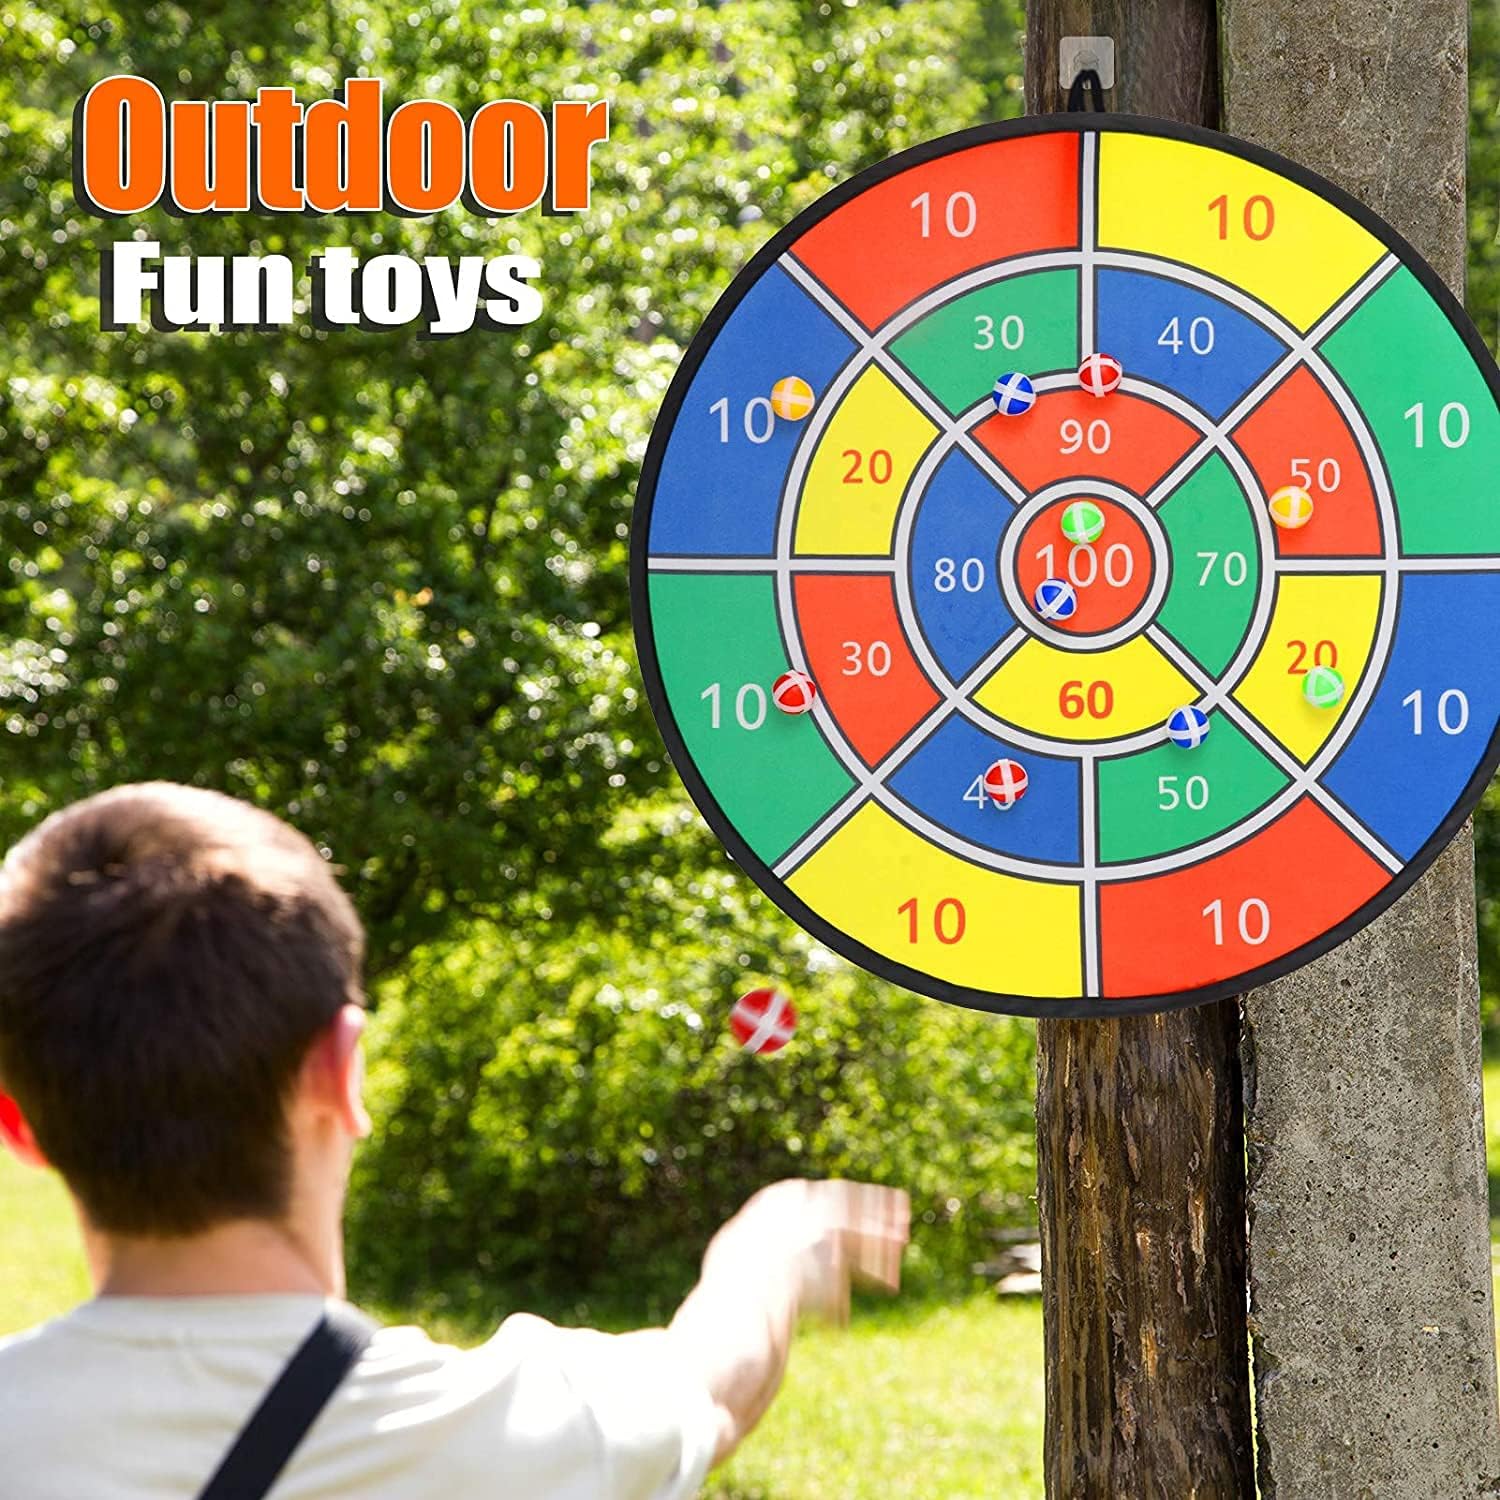 BooTaa 29 Large Dart Board for Kids, Kids Dart Board with Sticky Balls, Boys Toys, Indoor/Sport Outdoor Fun Party Play Game Toys, Birthday Gifts for 3 4 5 6 7 8 9 10 11 12 Year Old Boys Girls